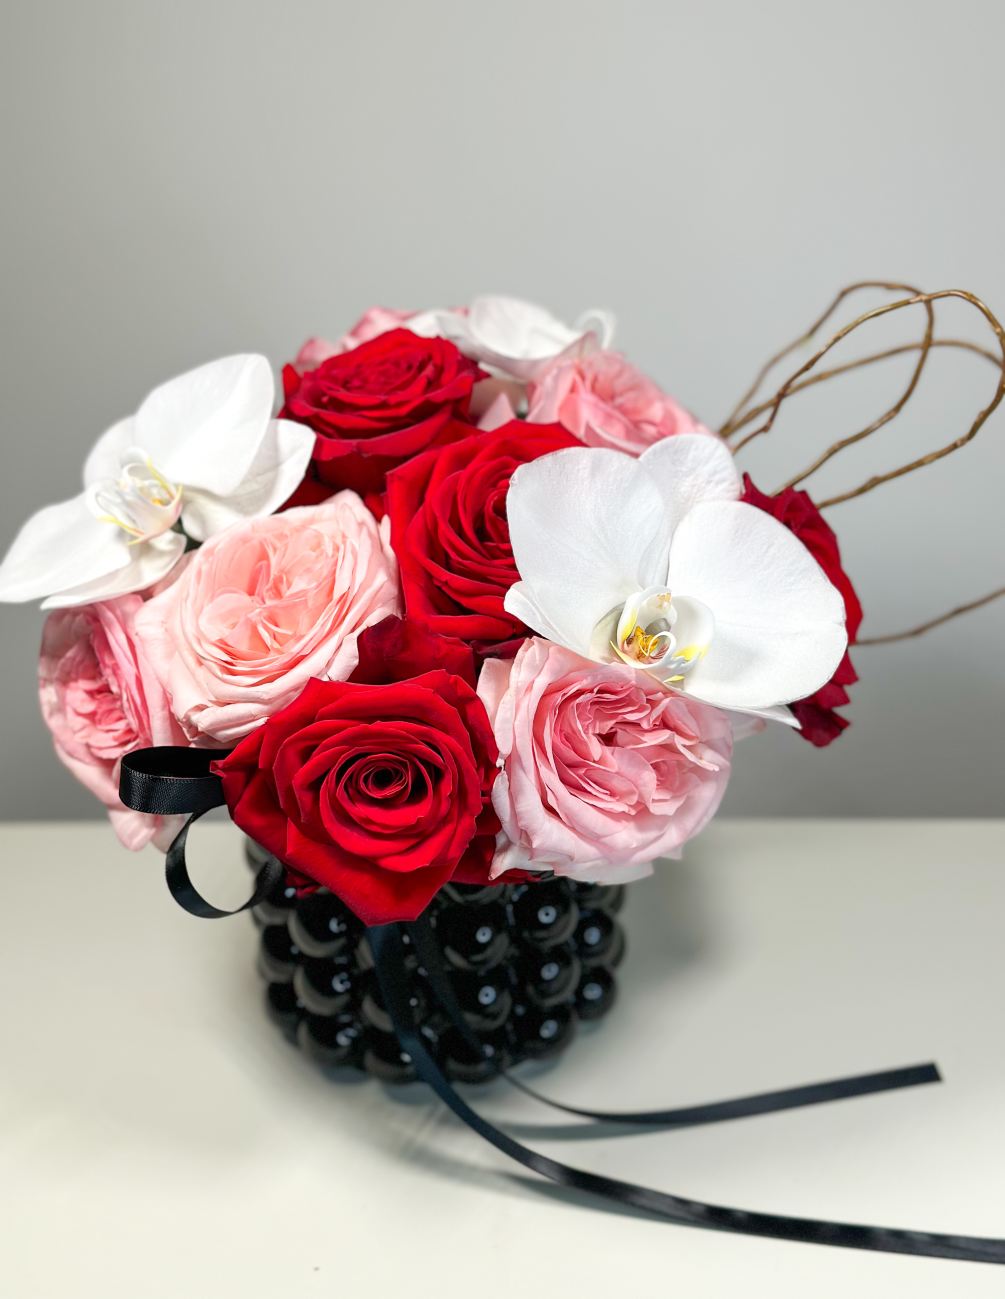 The combination of Pink Garden Rose, Red Rose and White Phalaenopsis Orchid